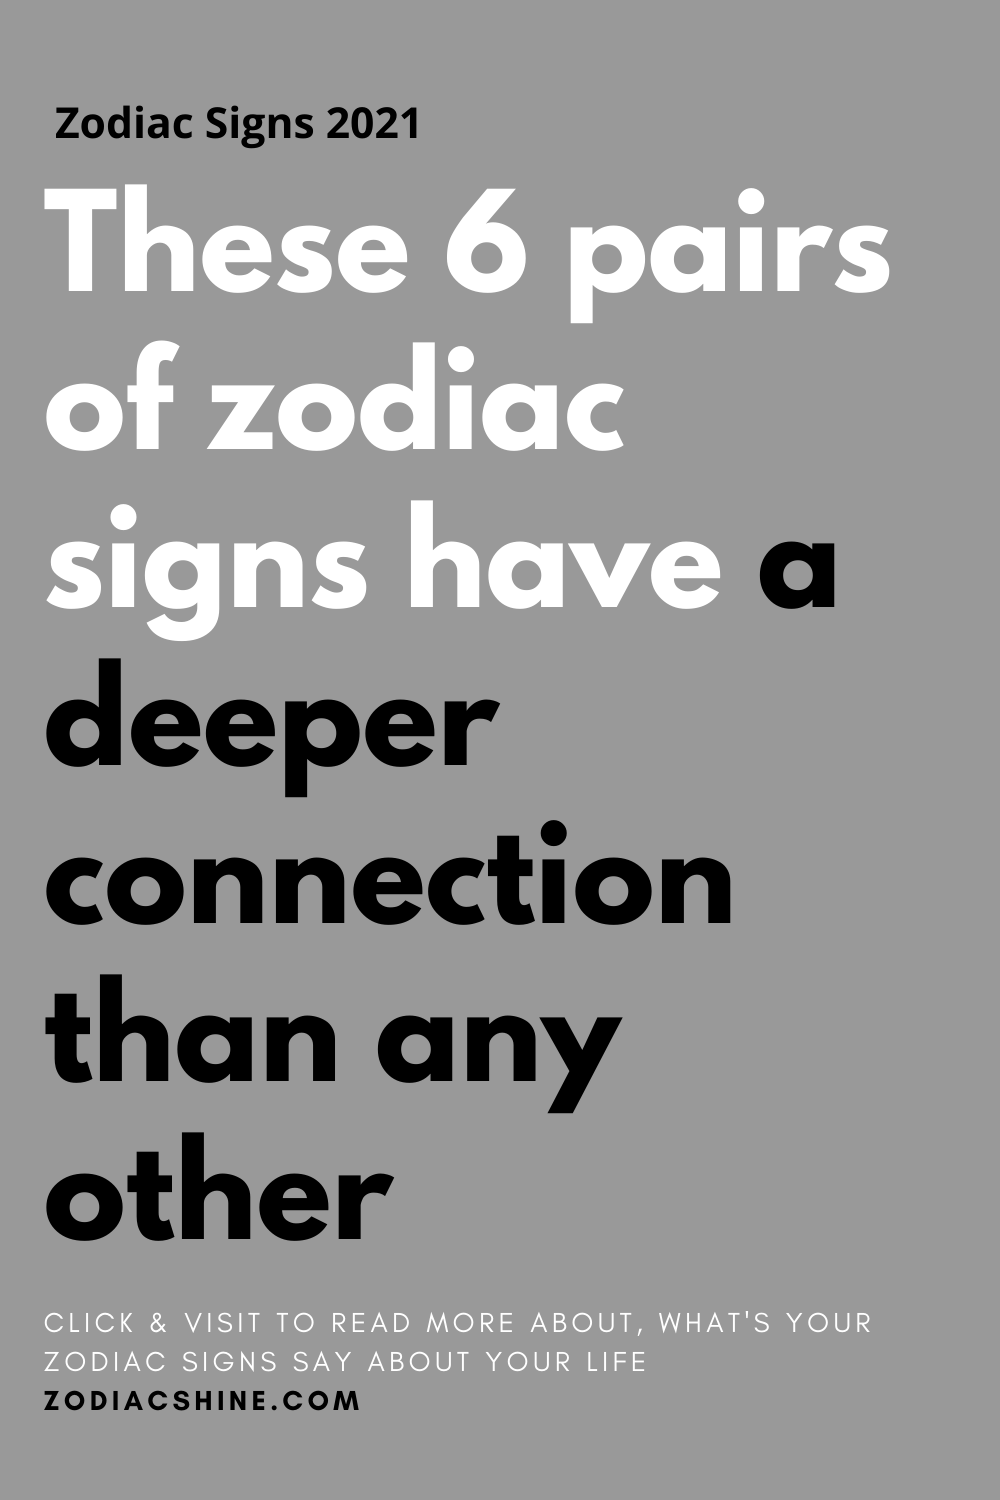 These 6 pairs of zodiac signs have a deeper connection than any other